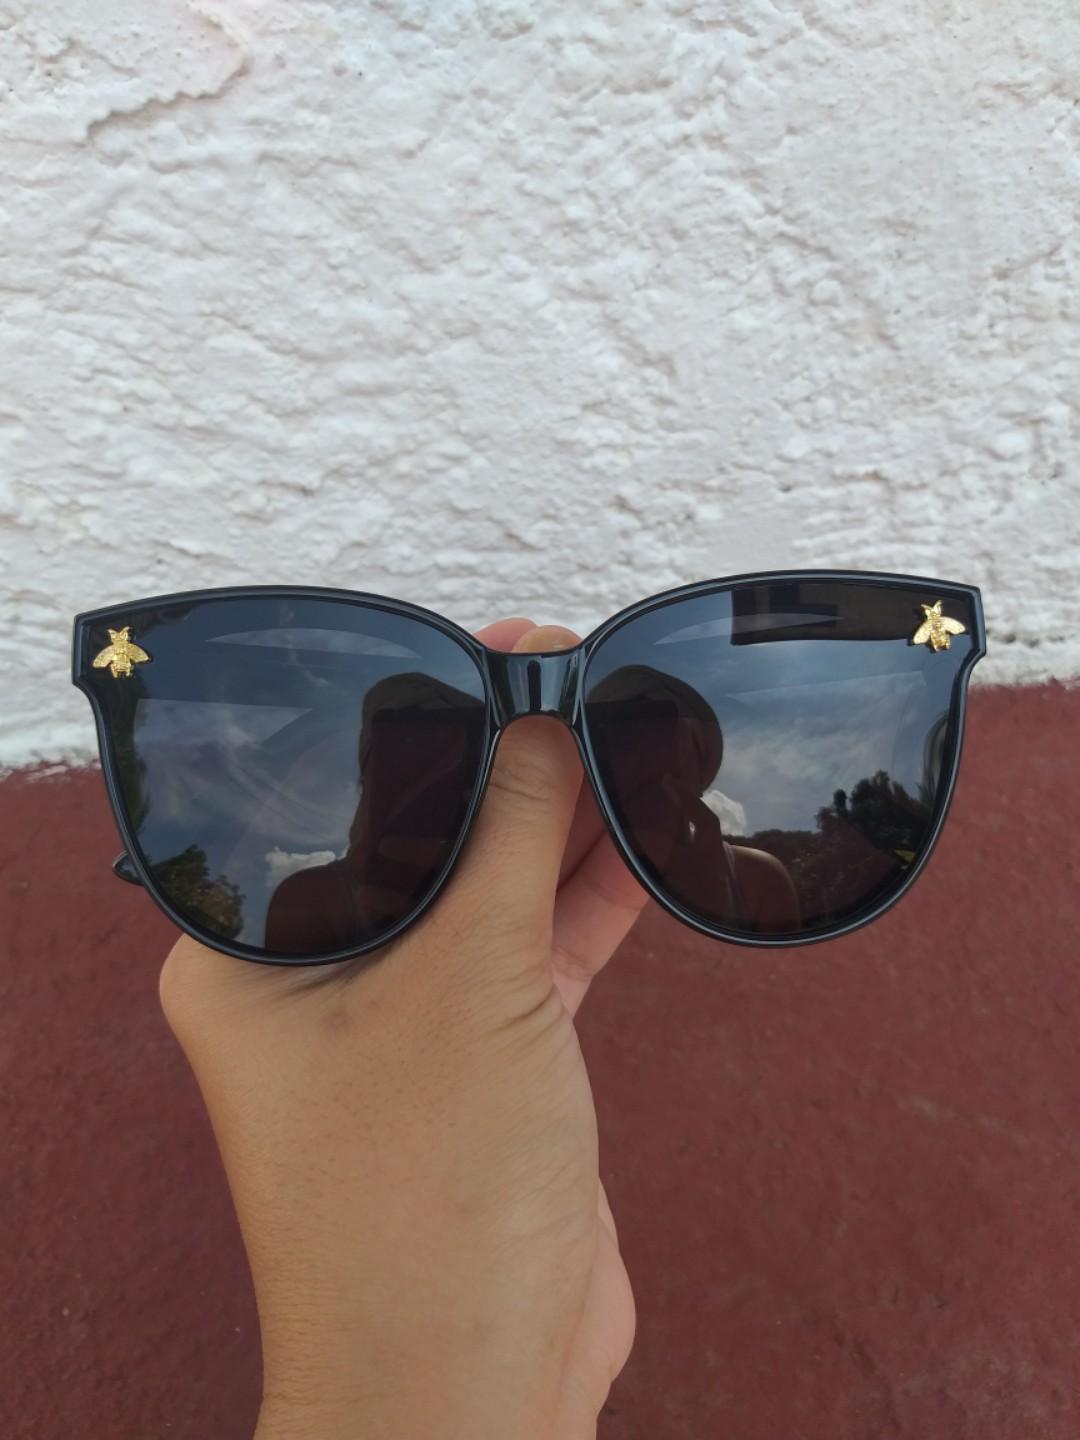 gucci sunglasses with a bee on them